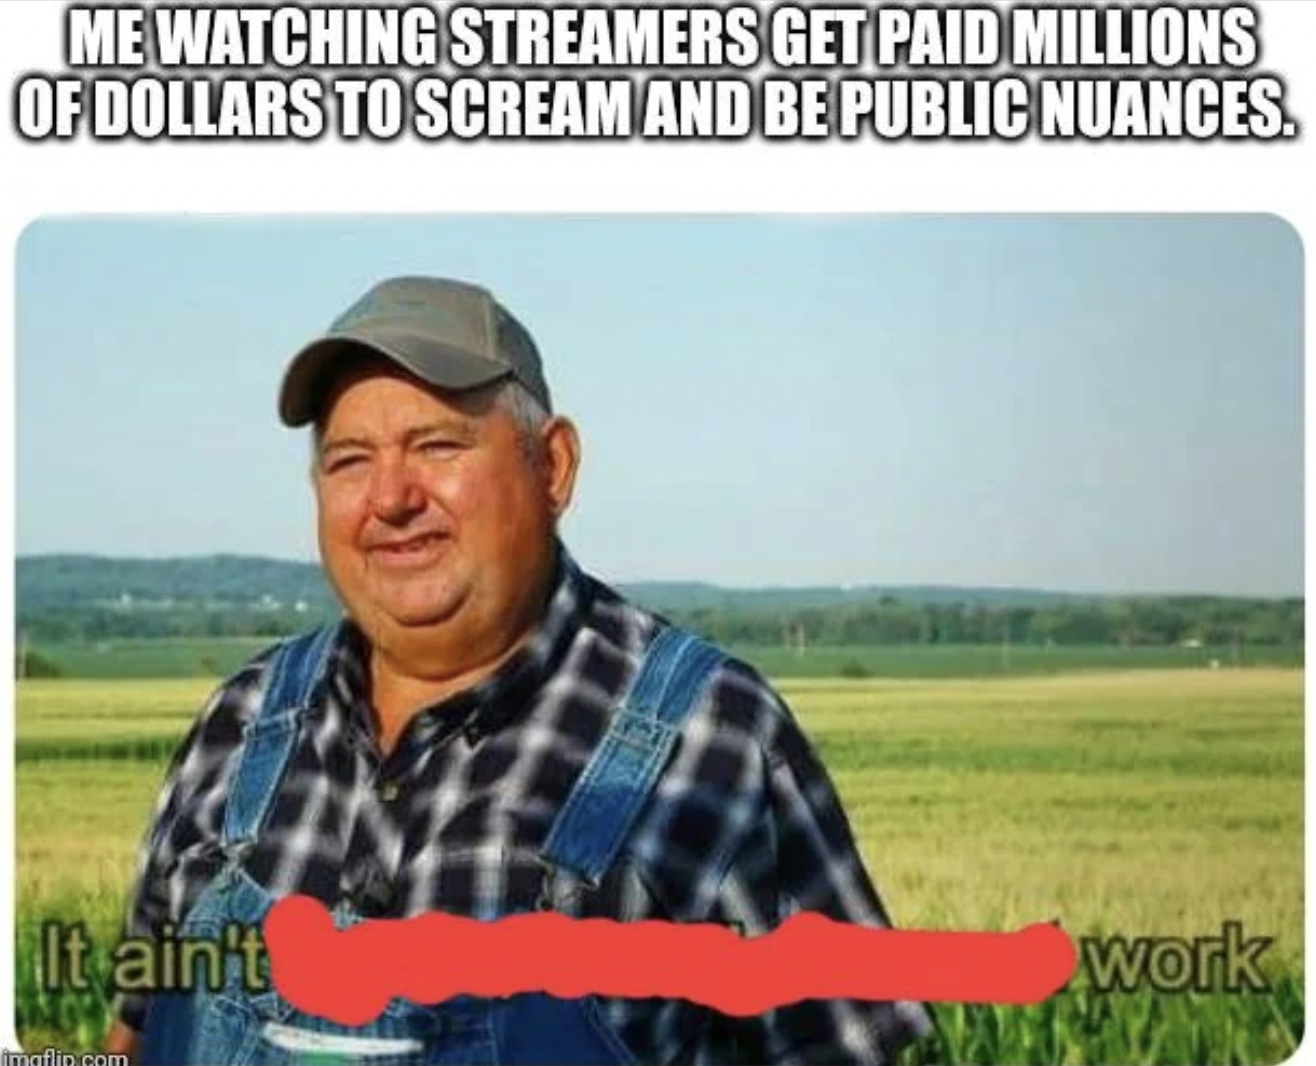 it's not much but it's honest work - Me Watching Streamers Get Paid Millions Of Dollars To Scream And Be Public Nuances. It ain't work